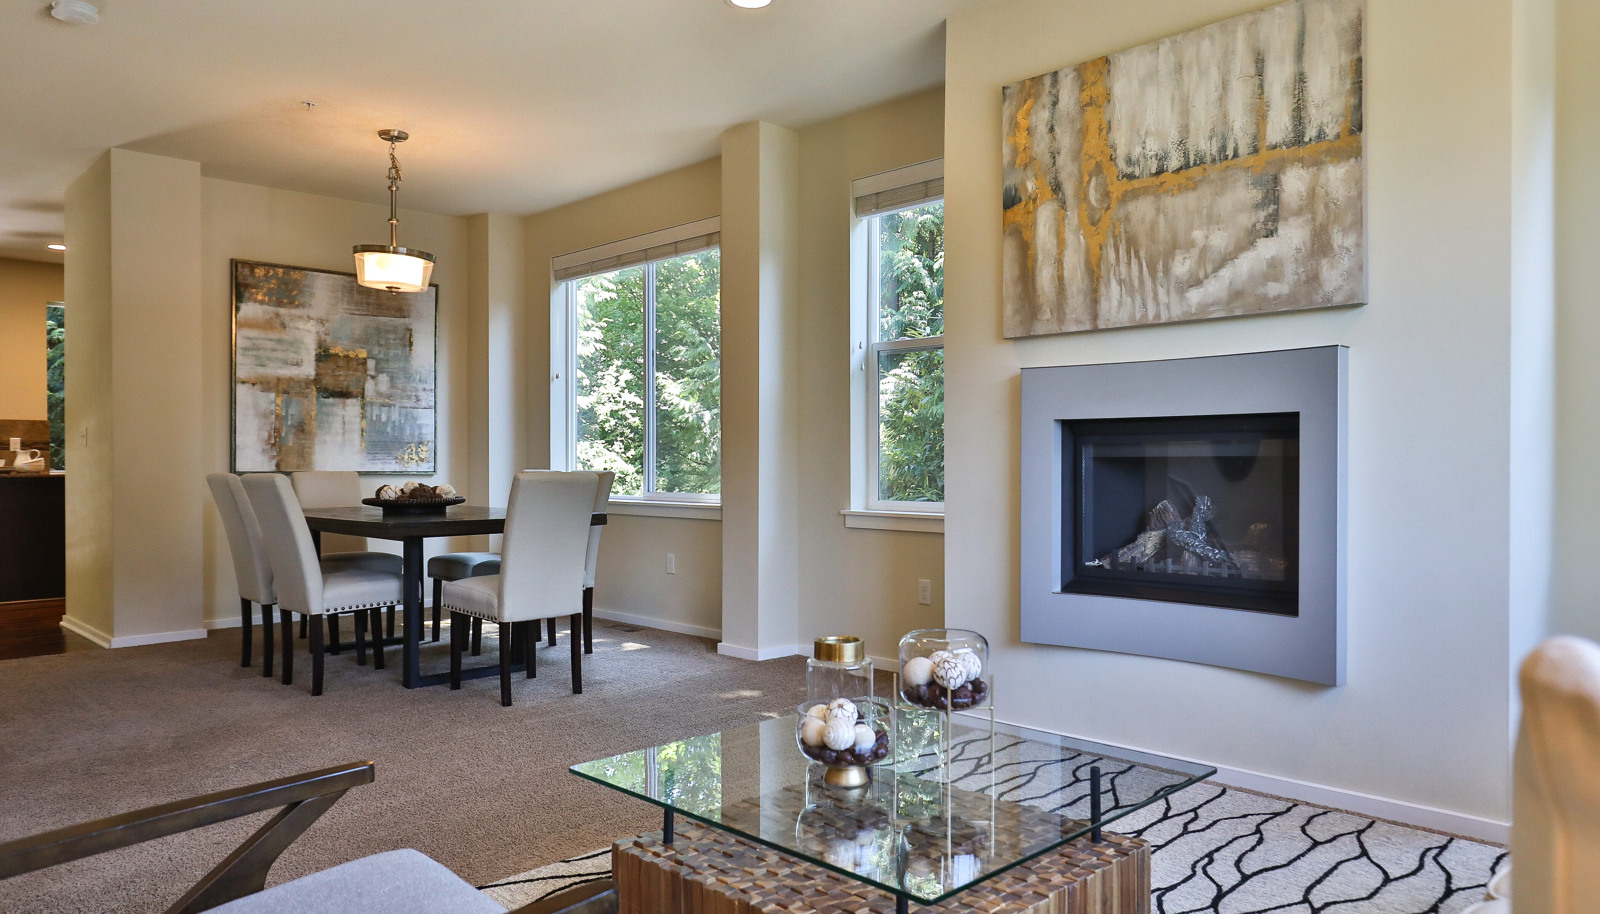 Modern gas fireplace gives living room a sophisticated ambiance.